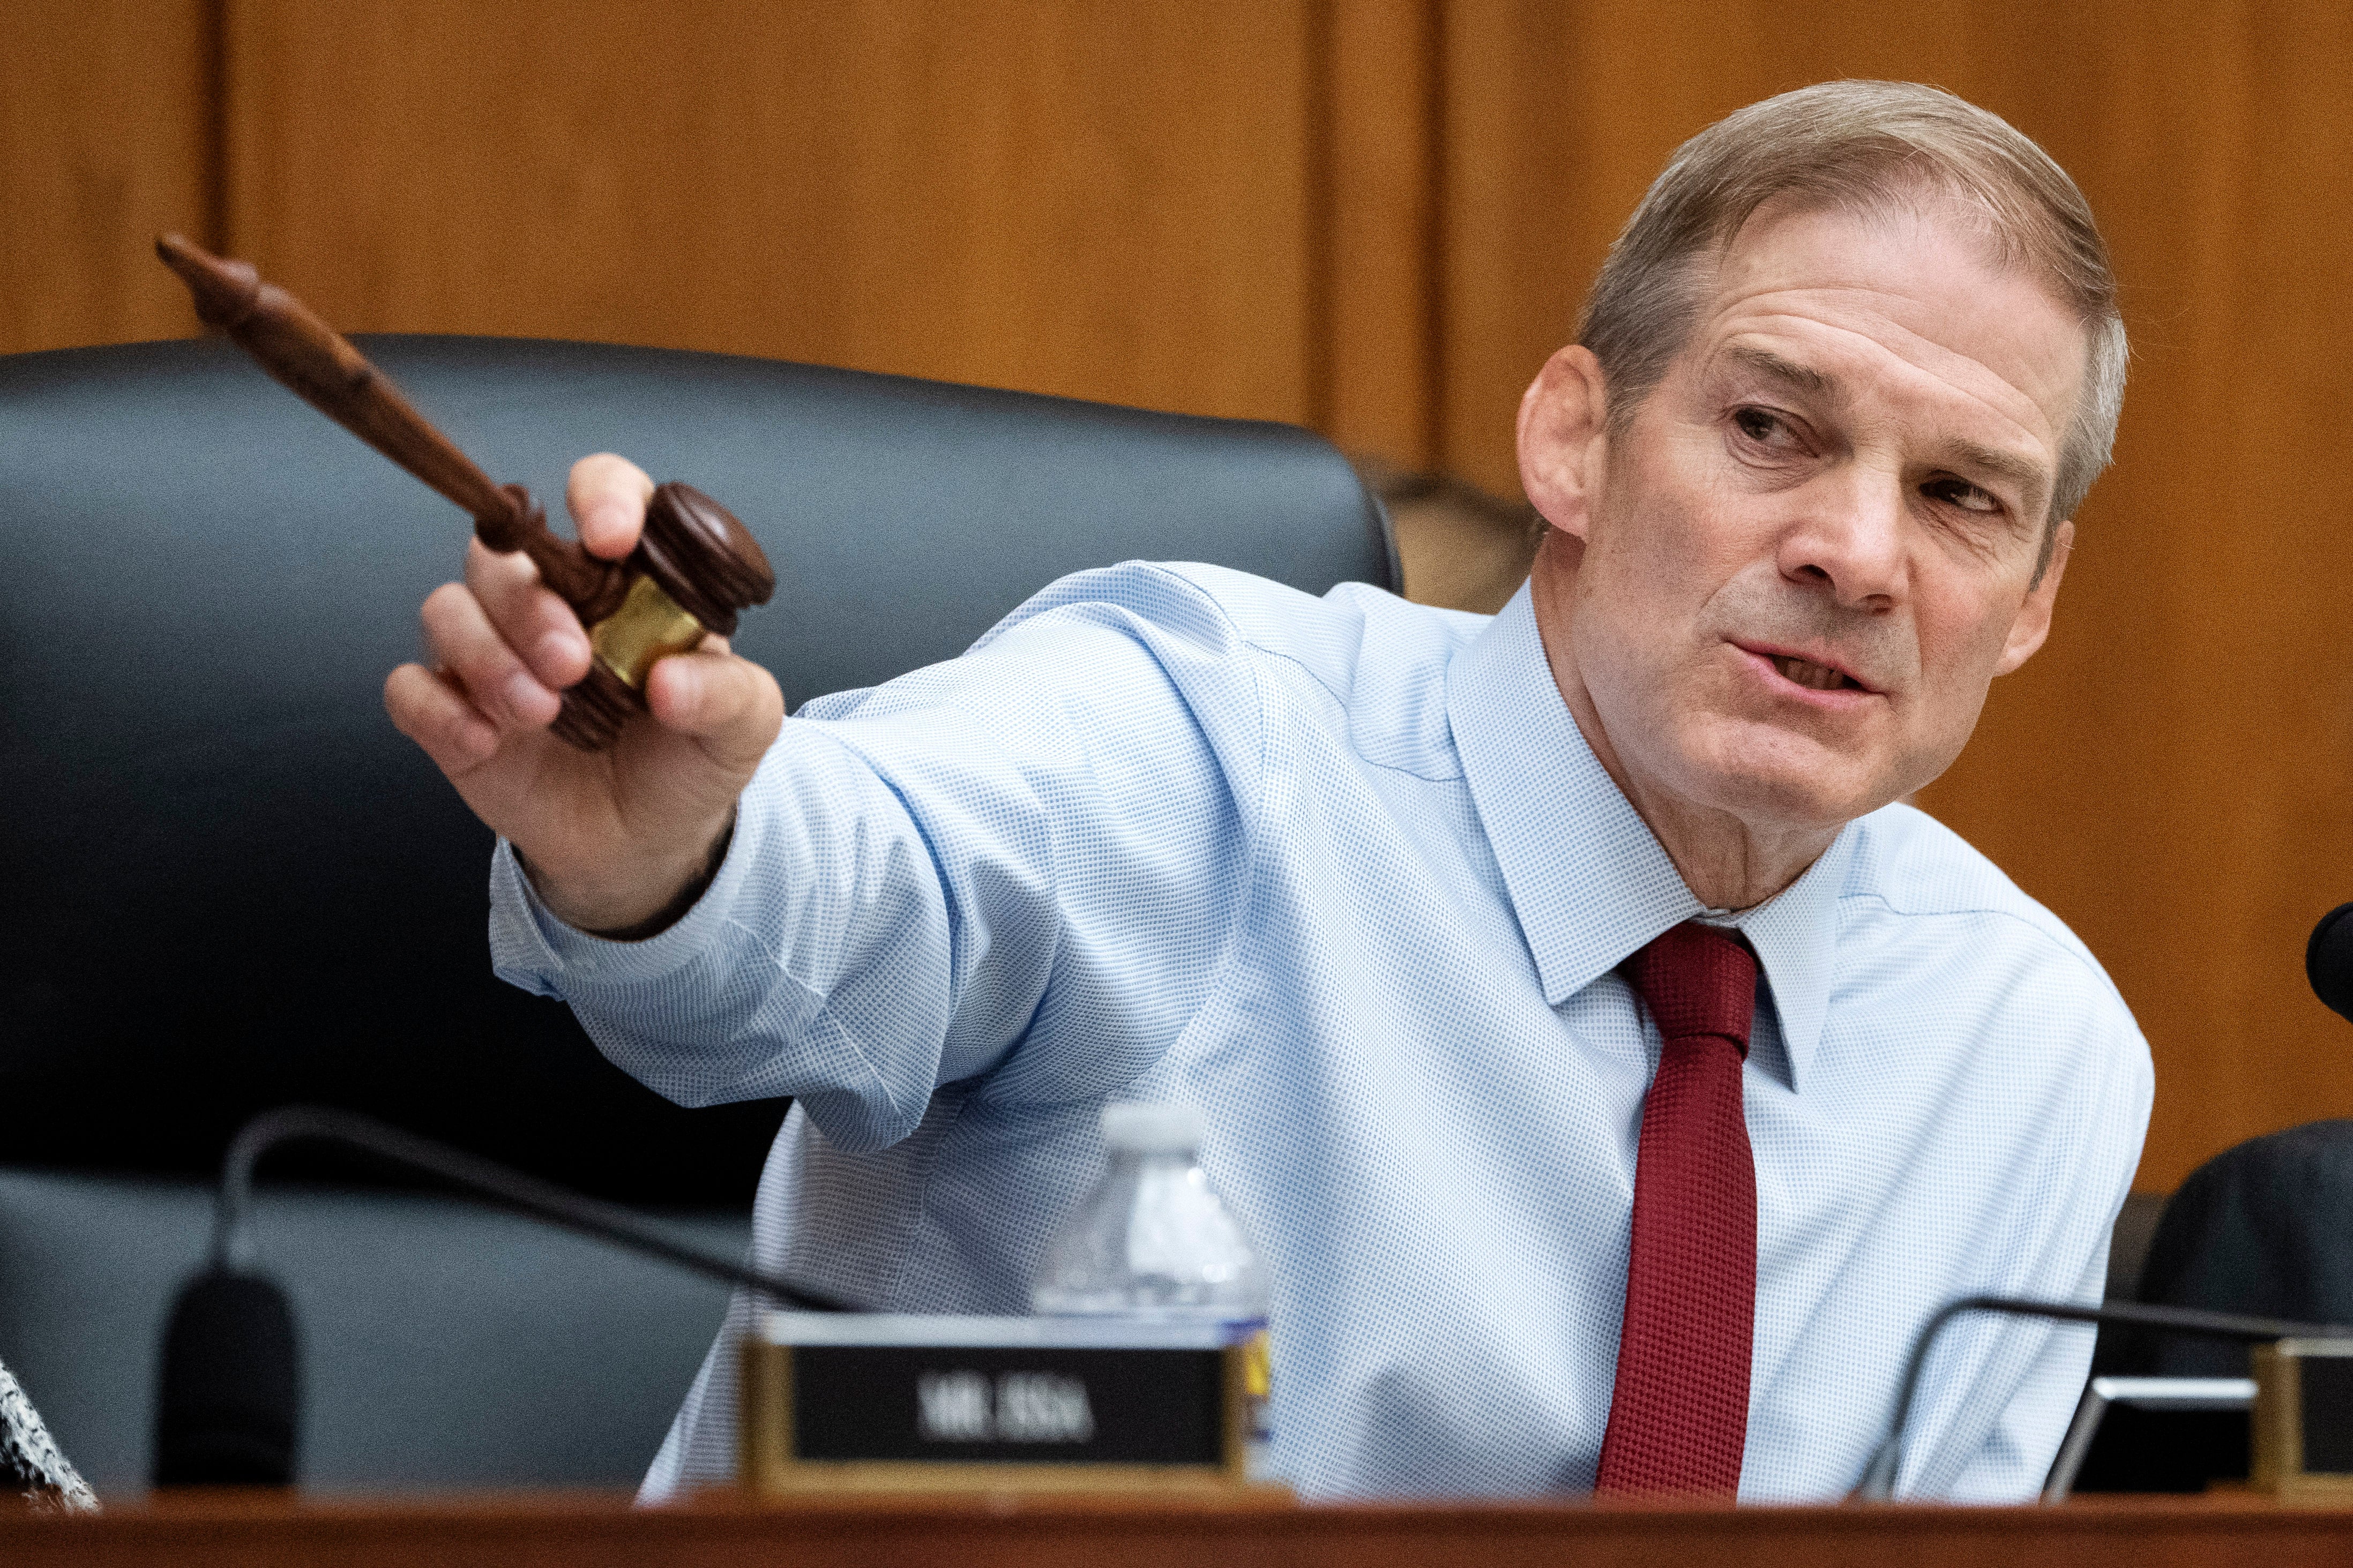 House Committee Chairman Jim Jordan spoke during a hearing on the US Department of Justice on June 4.